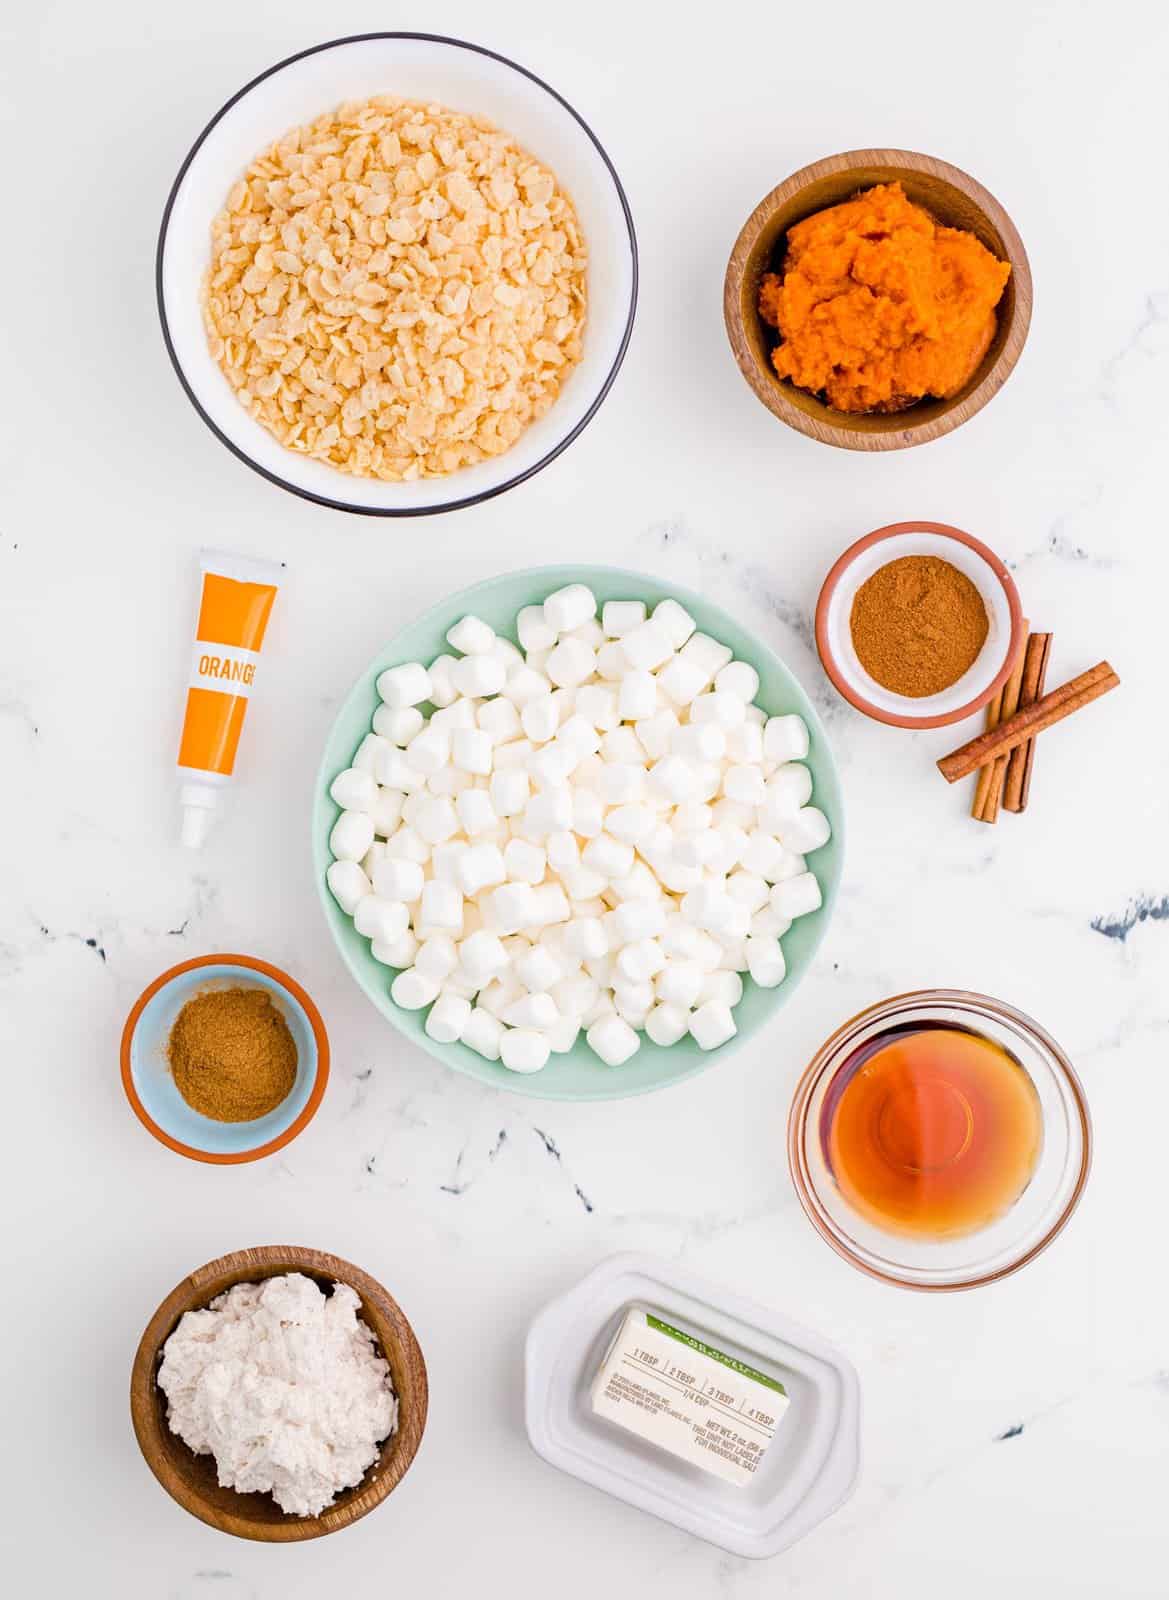 Ingredients needed: salted butter, mini marshmallows, maple syrup, Rice Krispies, pumpkin pie spice, pumpkin puree, cinnamon, orange food coloring and cinnamon whipped cream, optional.